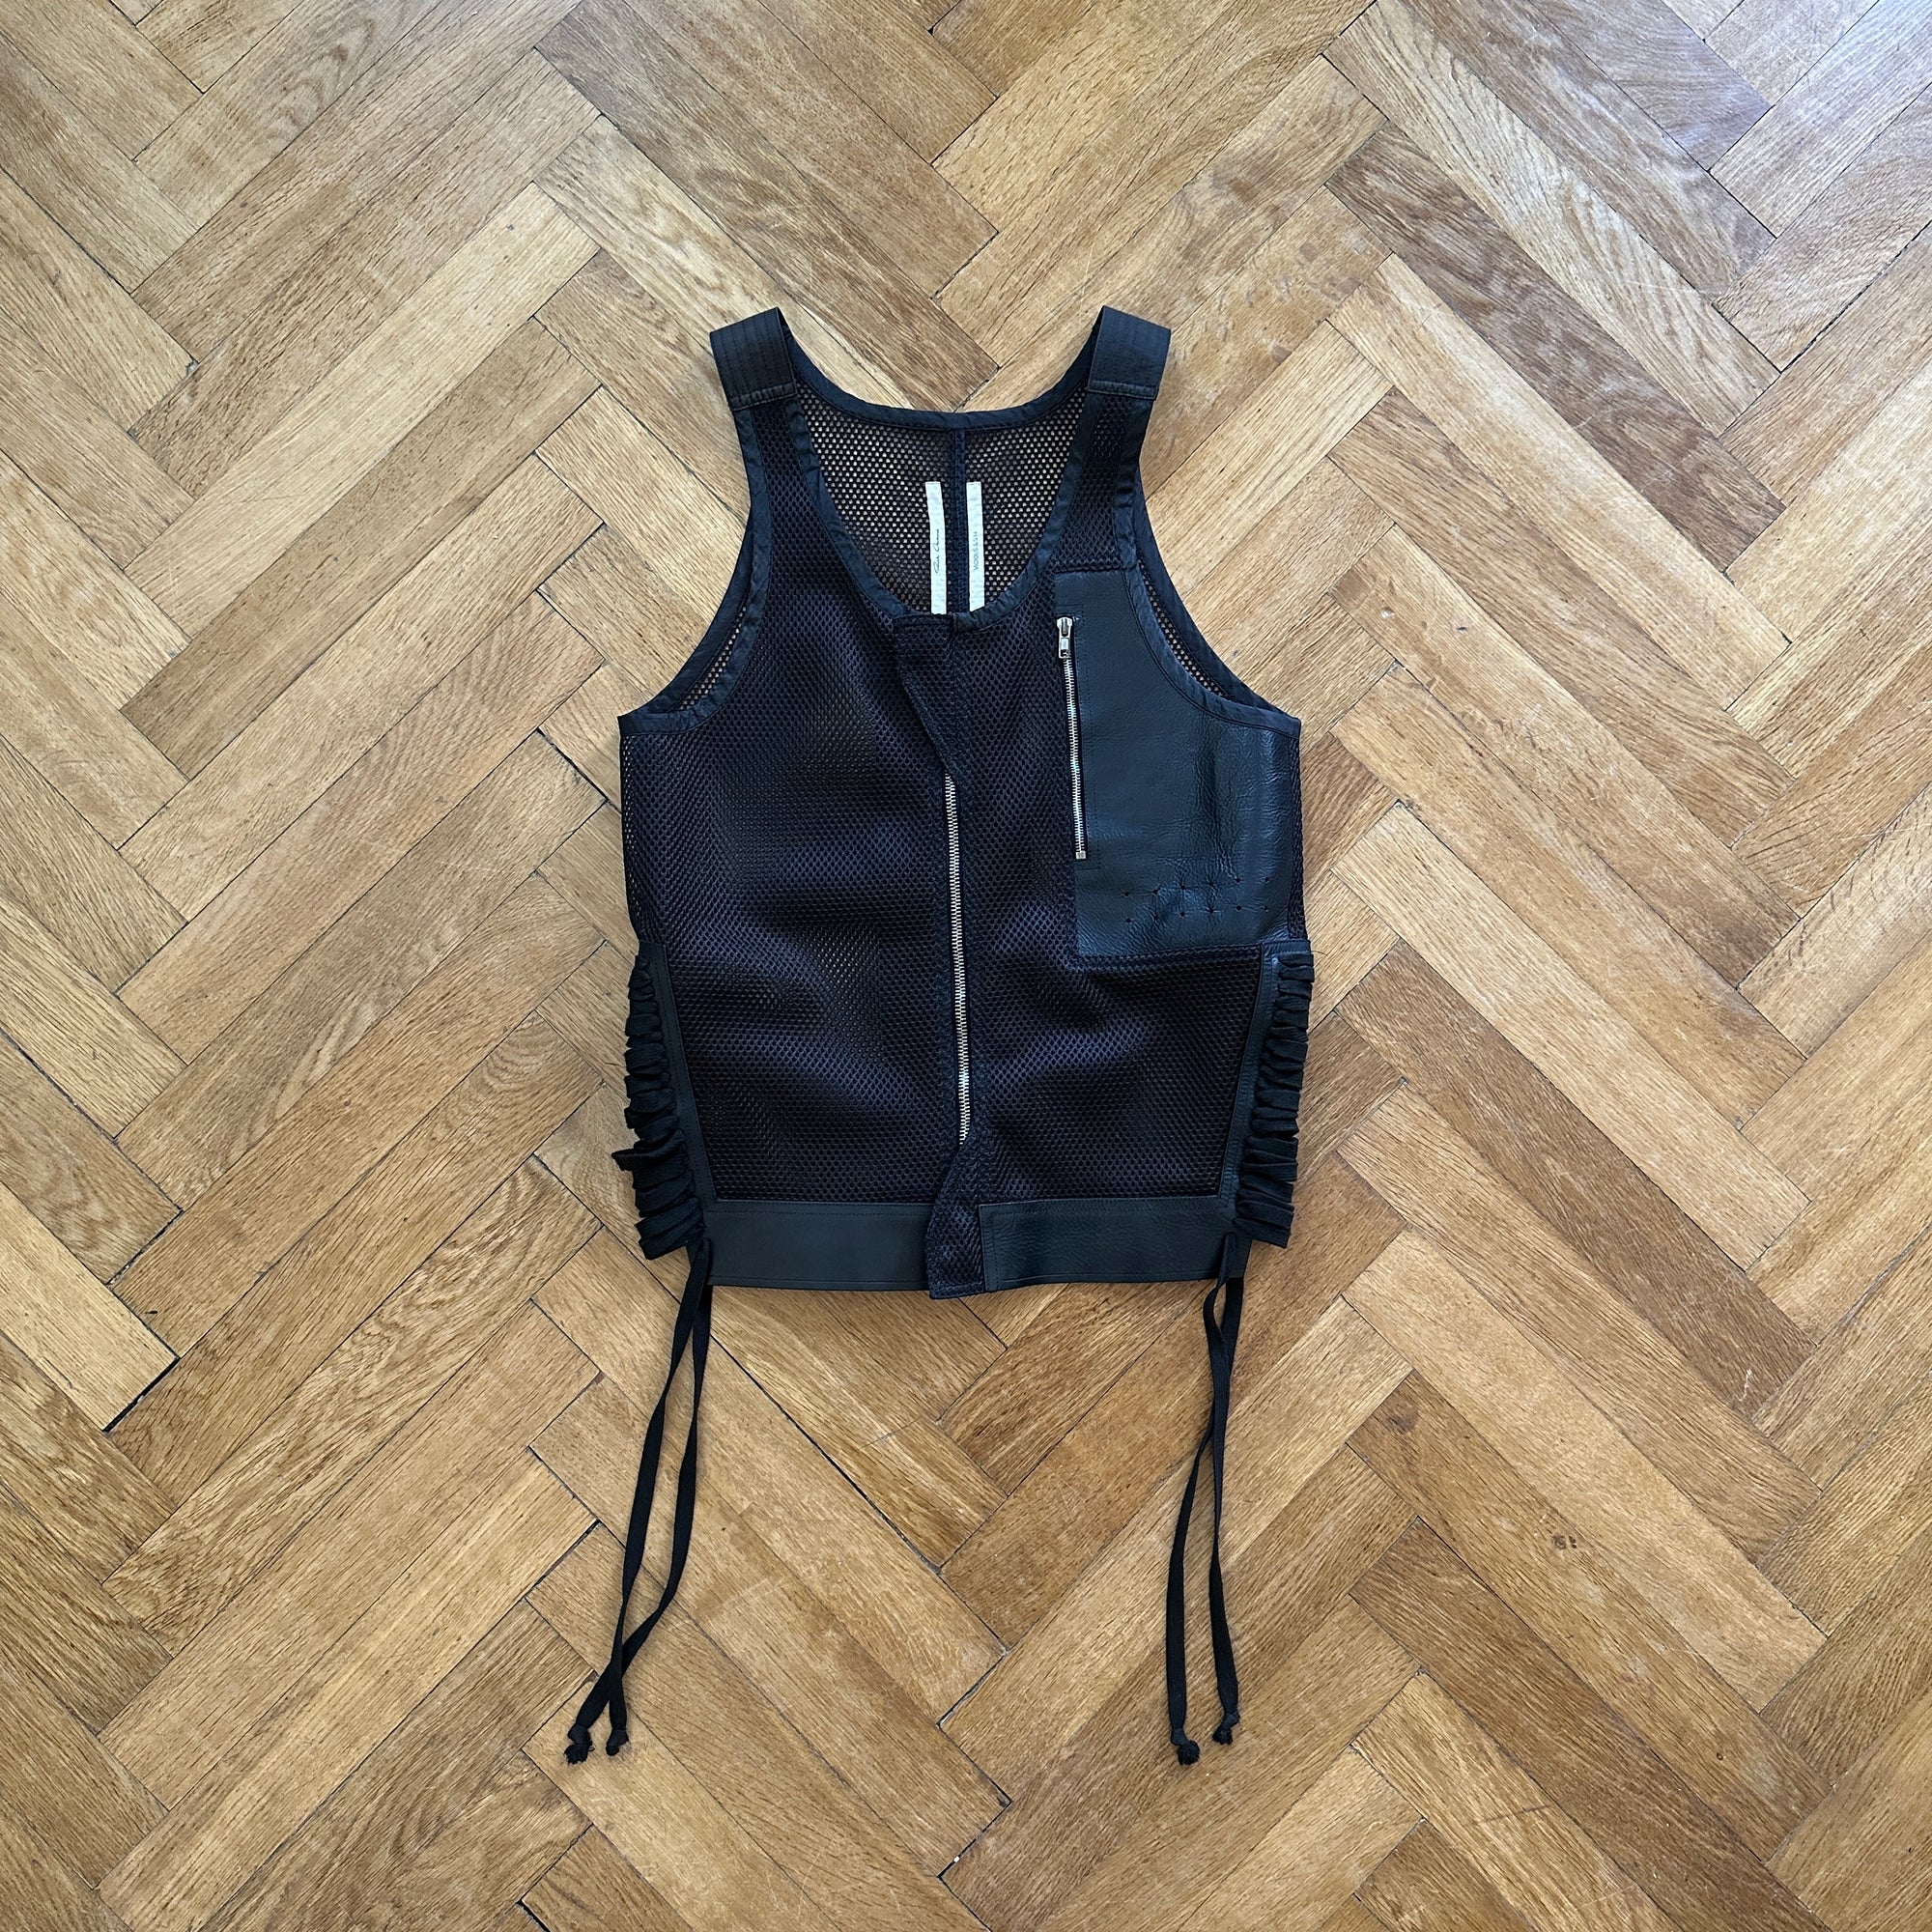 Rick Owens SS14 Vicious Tactial Utility Leather Mesh Laced Vest